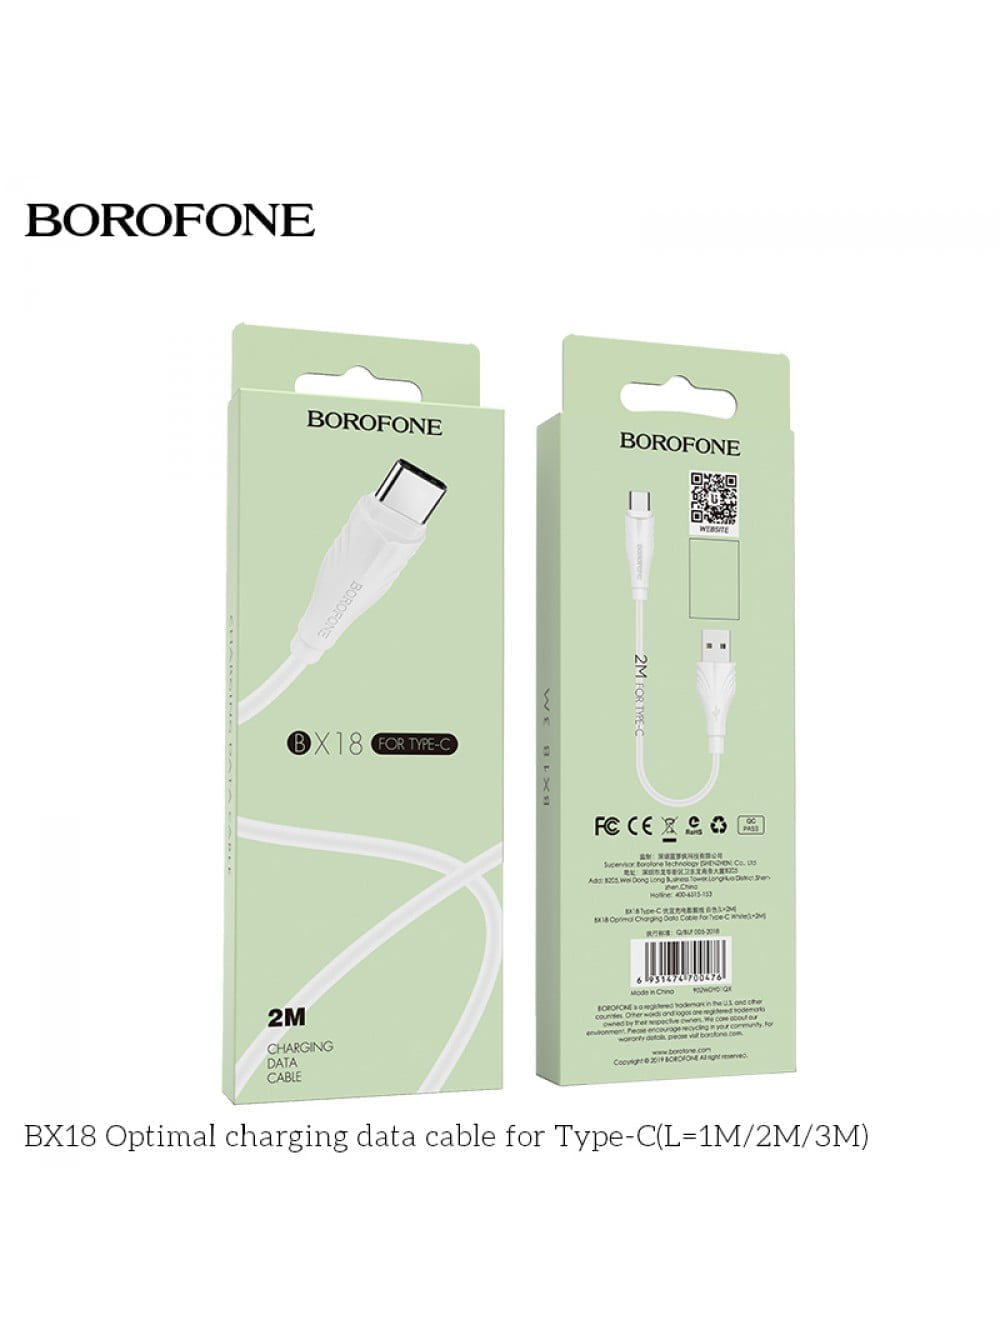 12 1000X1340 1 Hoco Borofone Usb Cable Bx18 Optimal Charging Data Cable For Type-C (L = 2M) Color: White